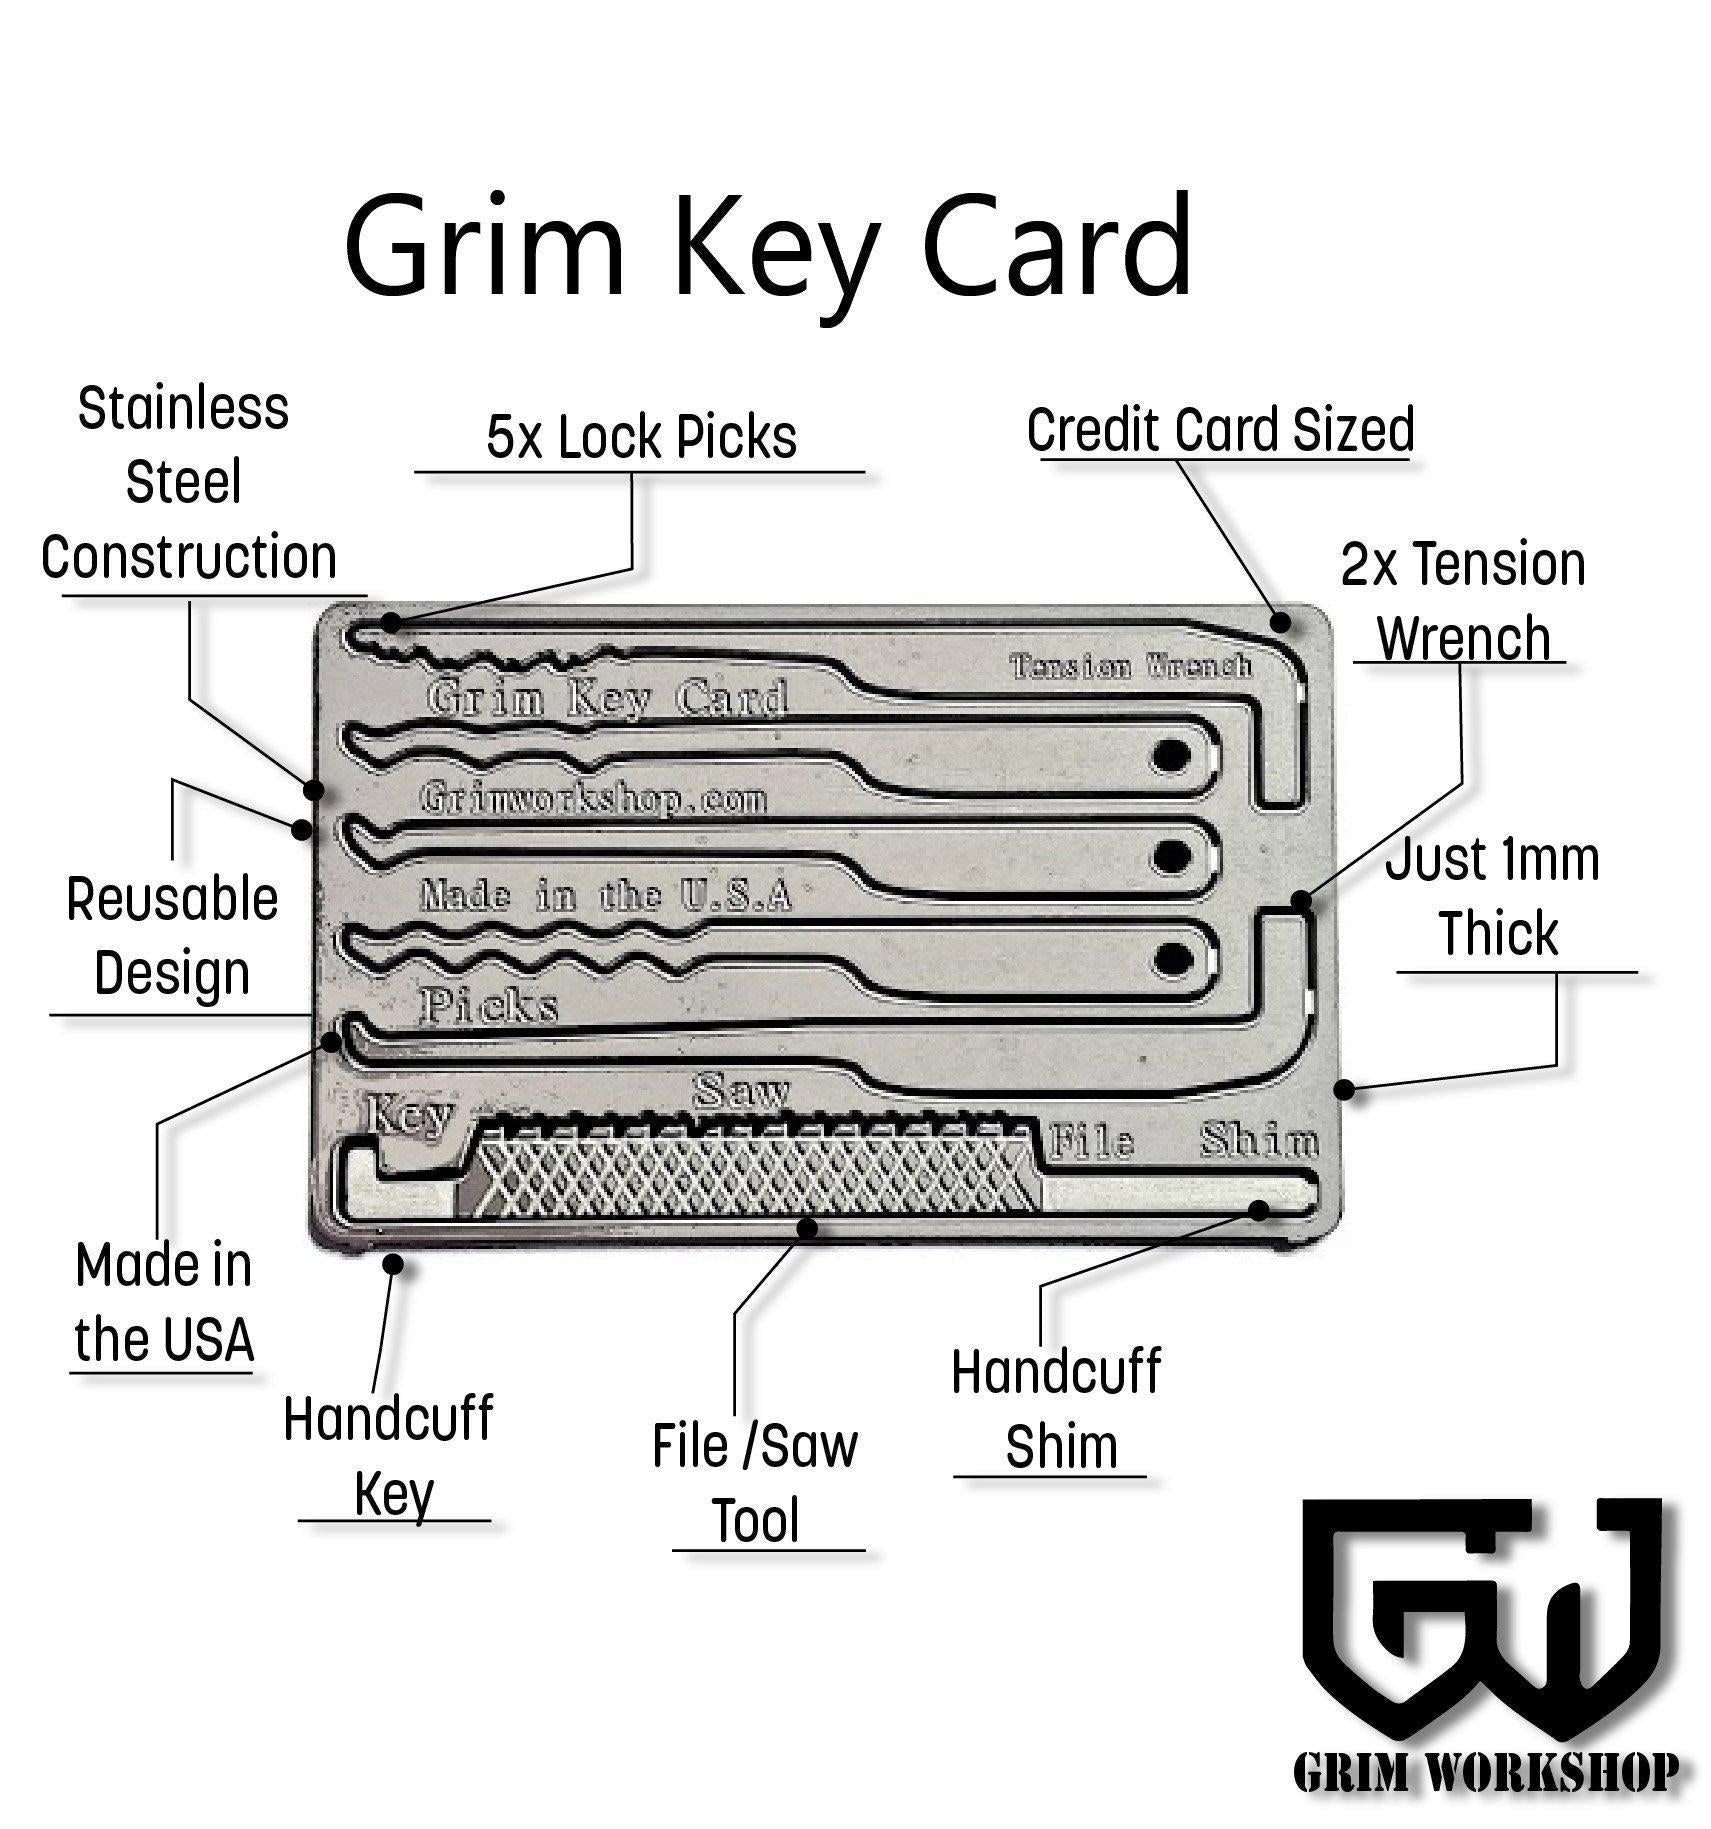 credit card lock picking multi tool and covert handcuff key lock pick set stainless steel survival card